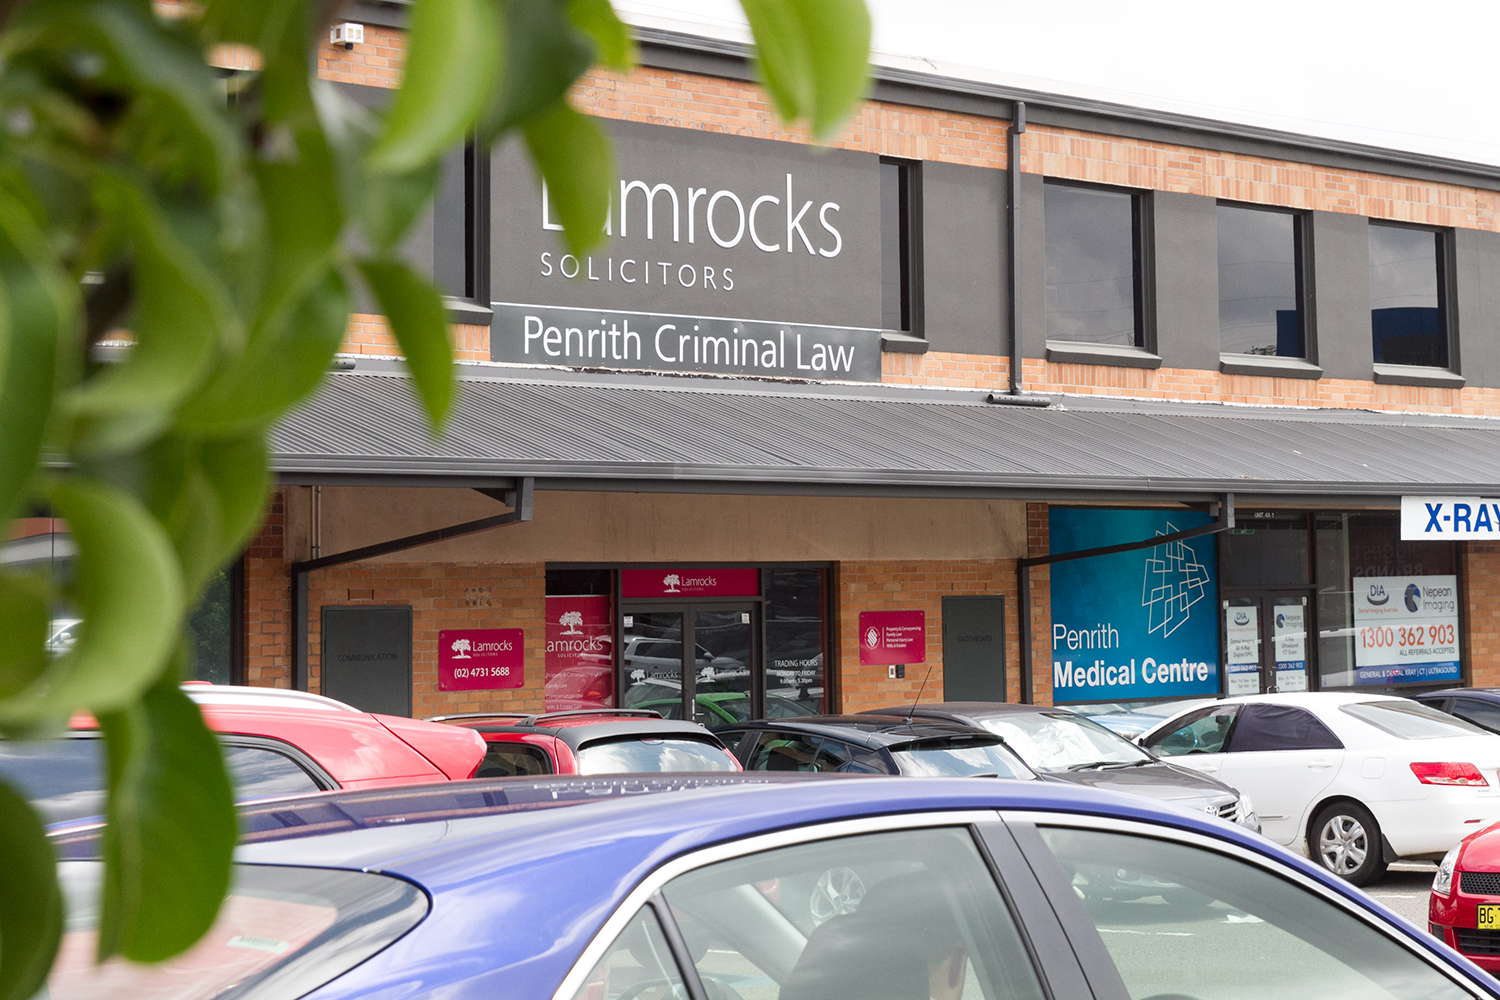 Penrith Criminal Law Centre is located within the Henry Lawson Centre